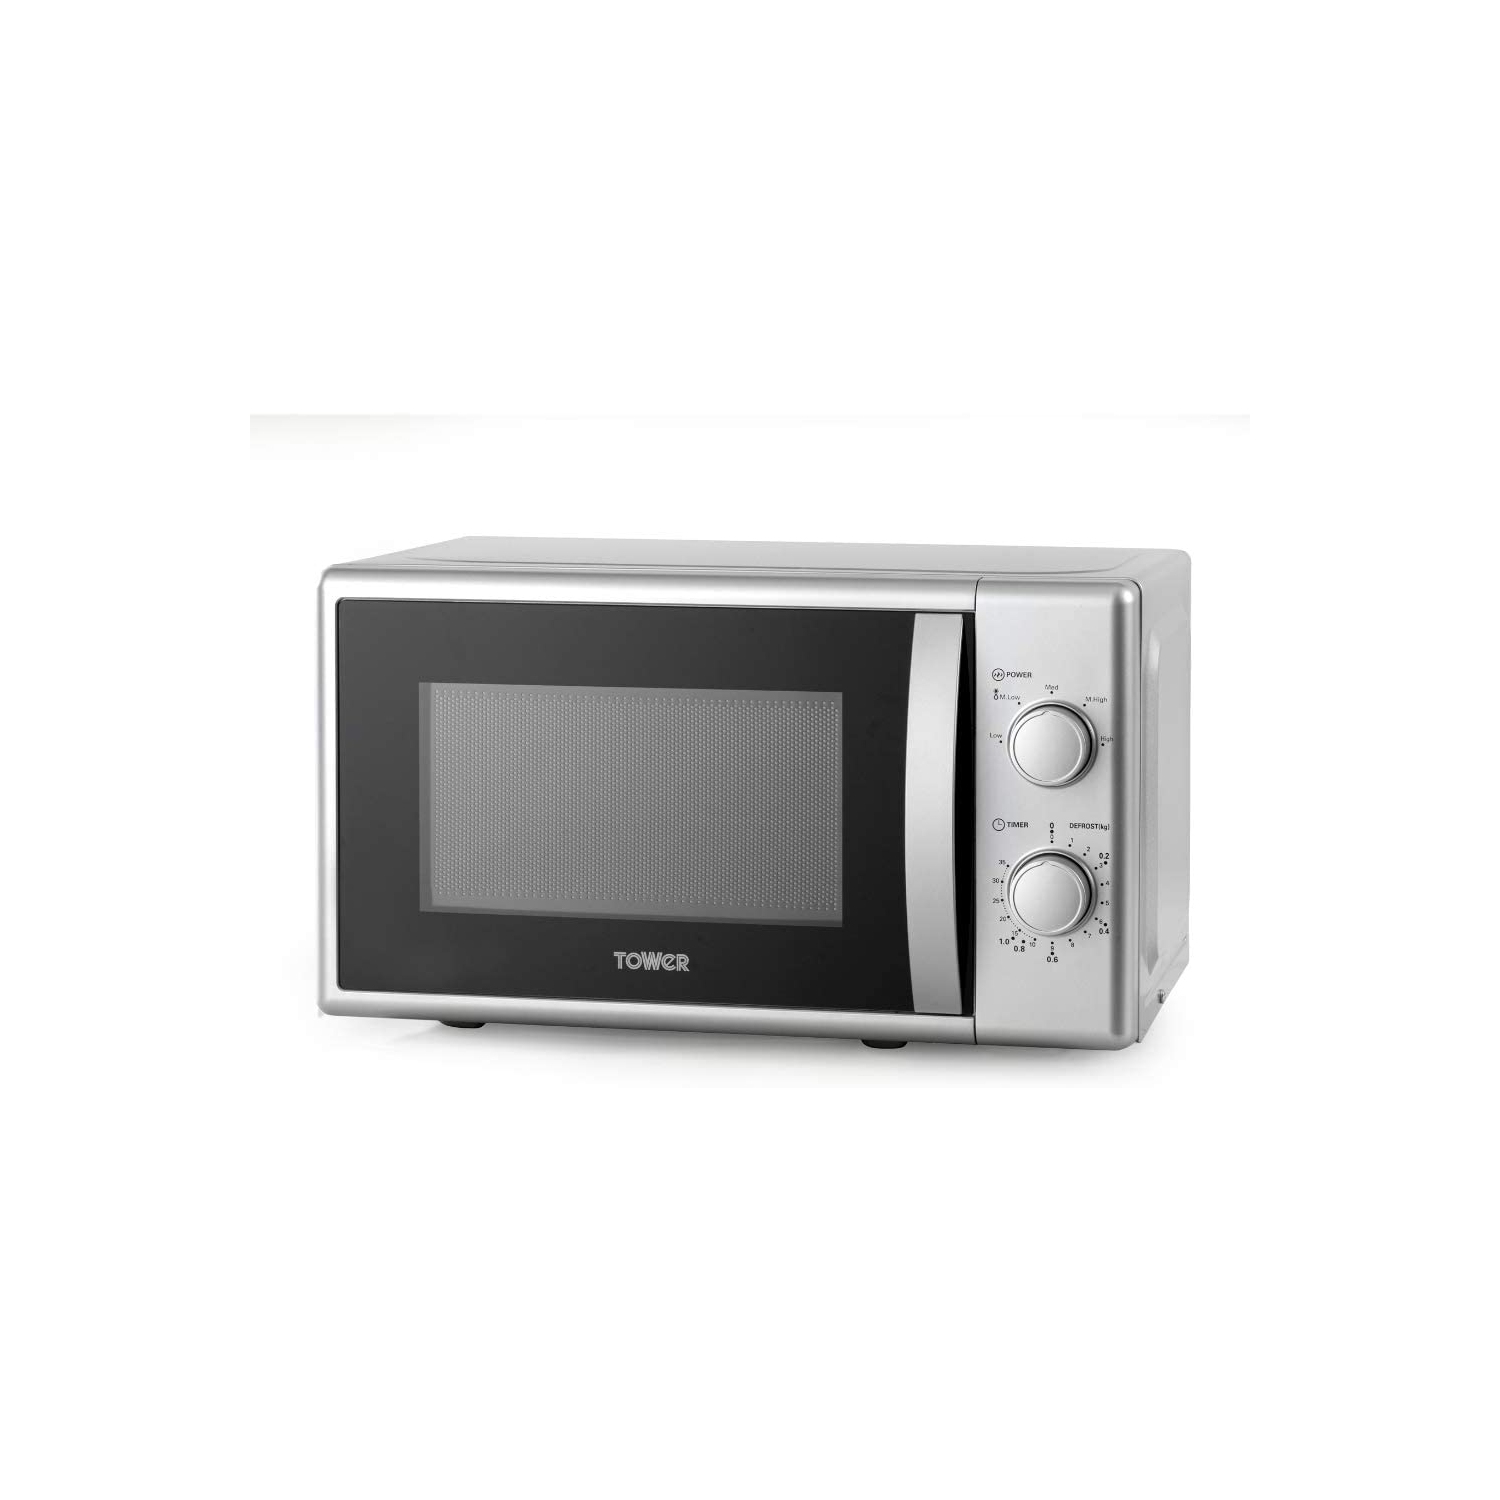 Tower Microwave, 700 Watts, Silver - 0